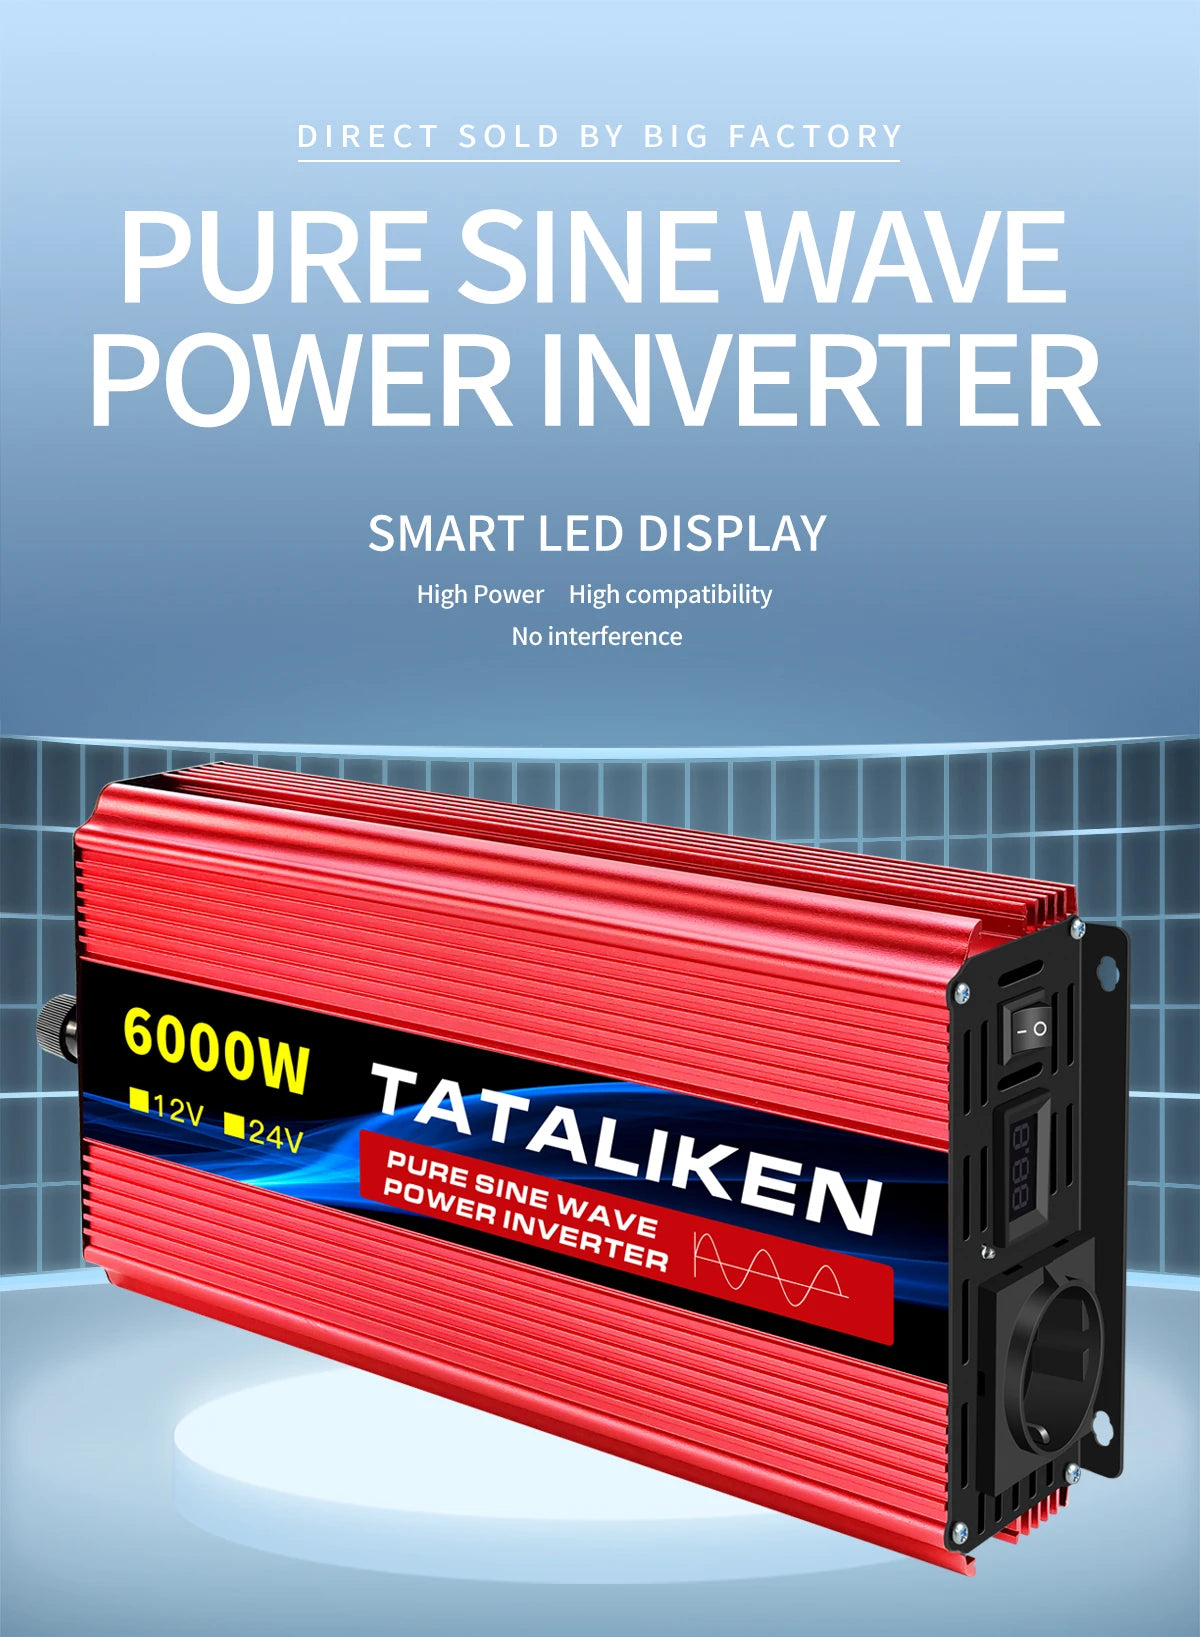 High-power pure sine wave inverter with smart display charges laptops, tablets, and phones without interference.